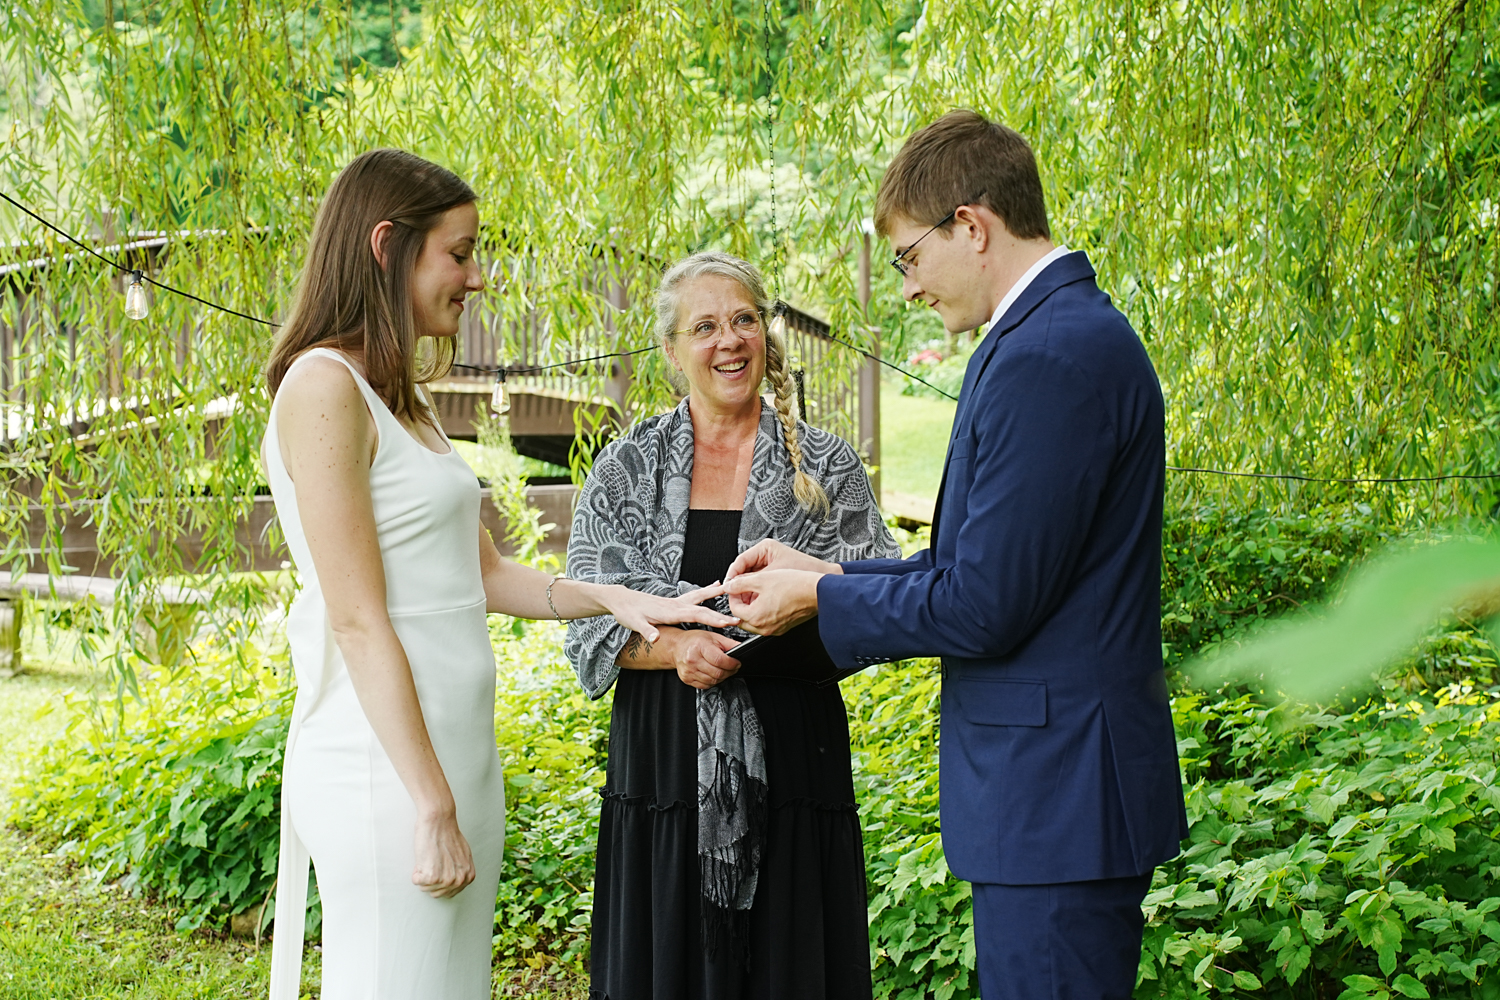 Simple couples only ceremony under a willow tree with a woman officiant